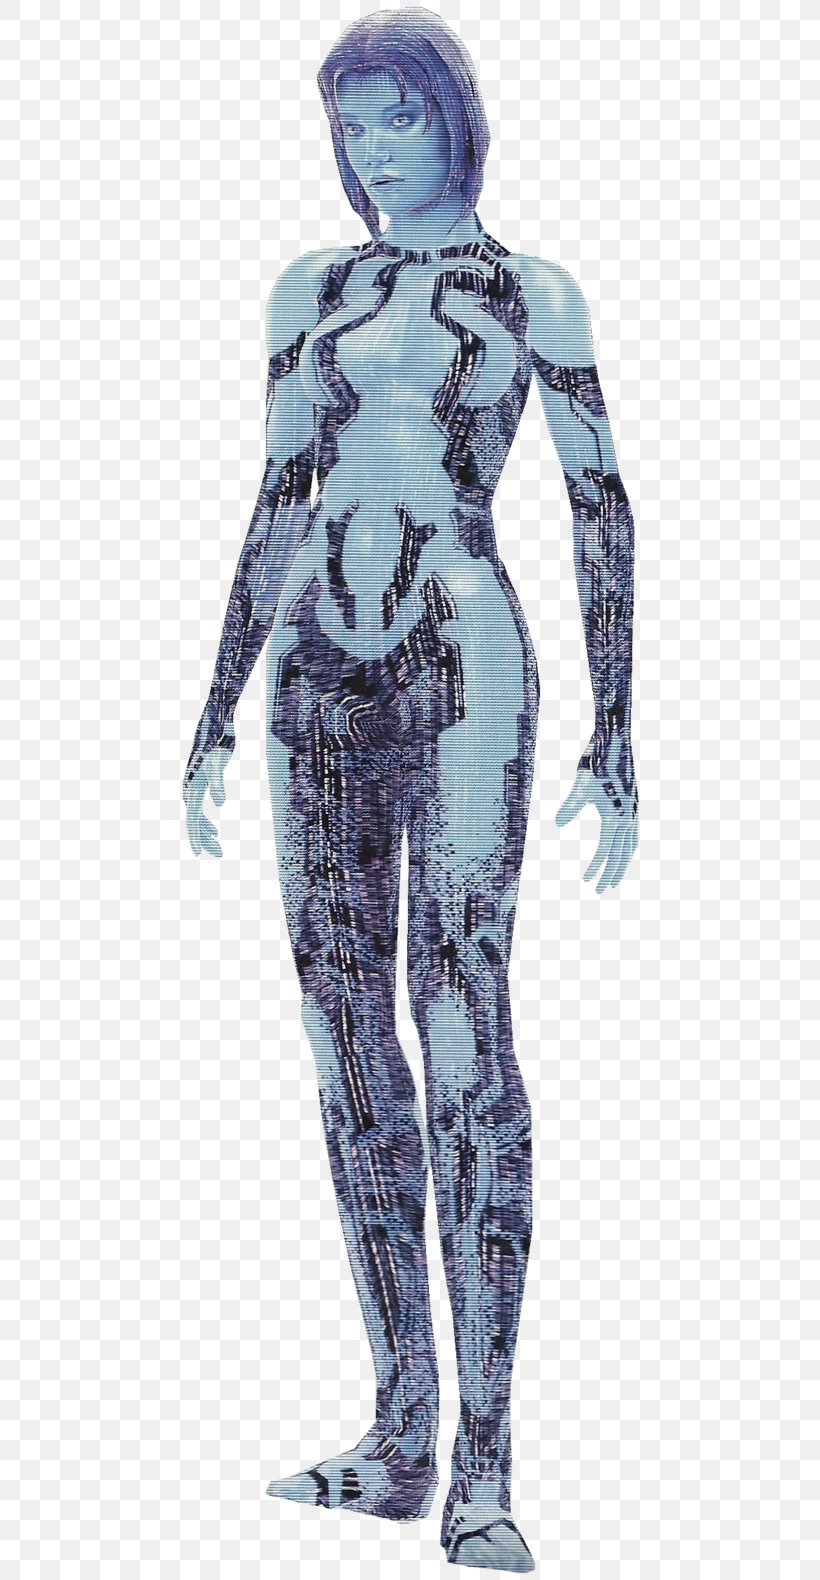 Halo: Combat Evolved Halo 3: ODST Halo 4 Halo 2, PNG, 506x1580px, Halo Combat Evolved, Cortana, Costume, Costume Design, Fictional Character Download Free